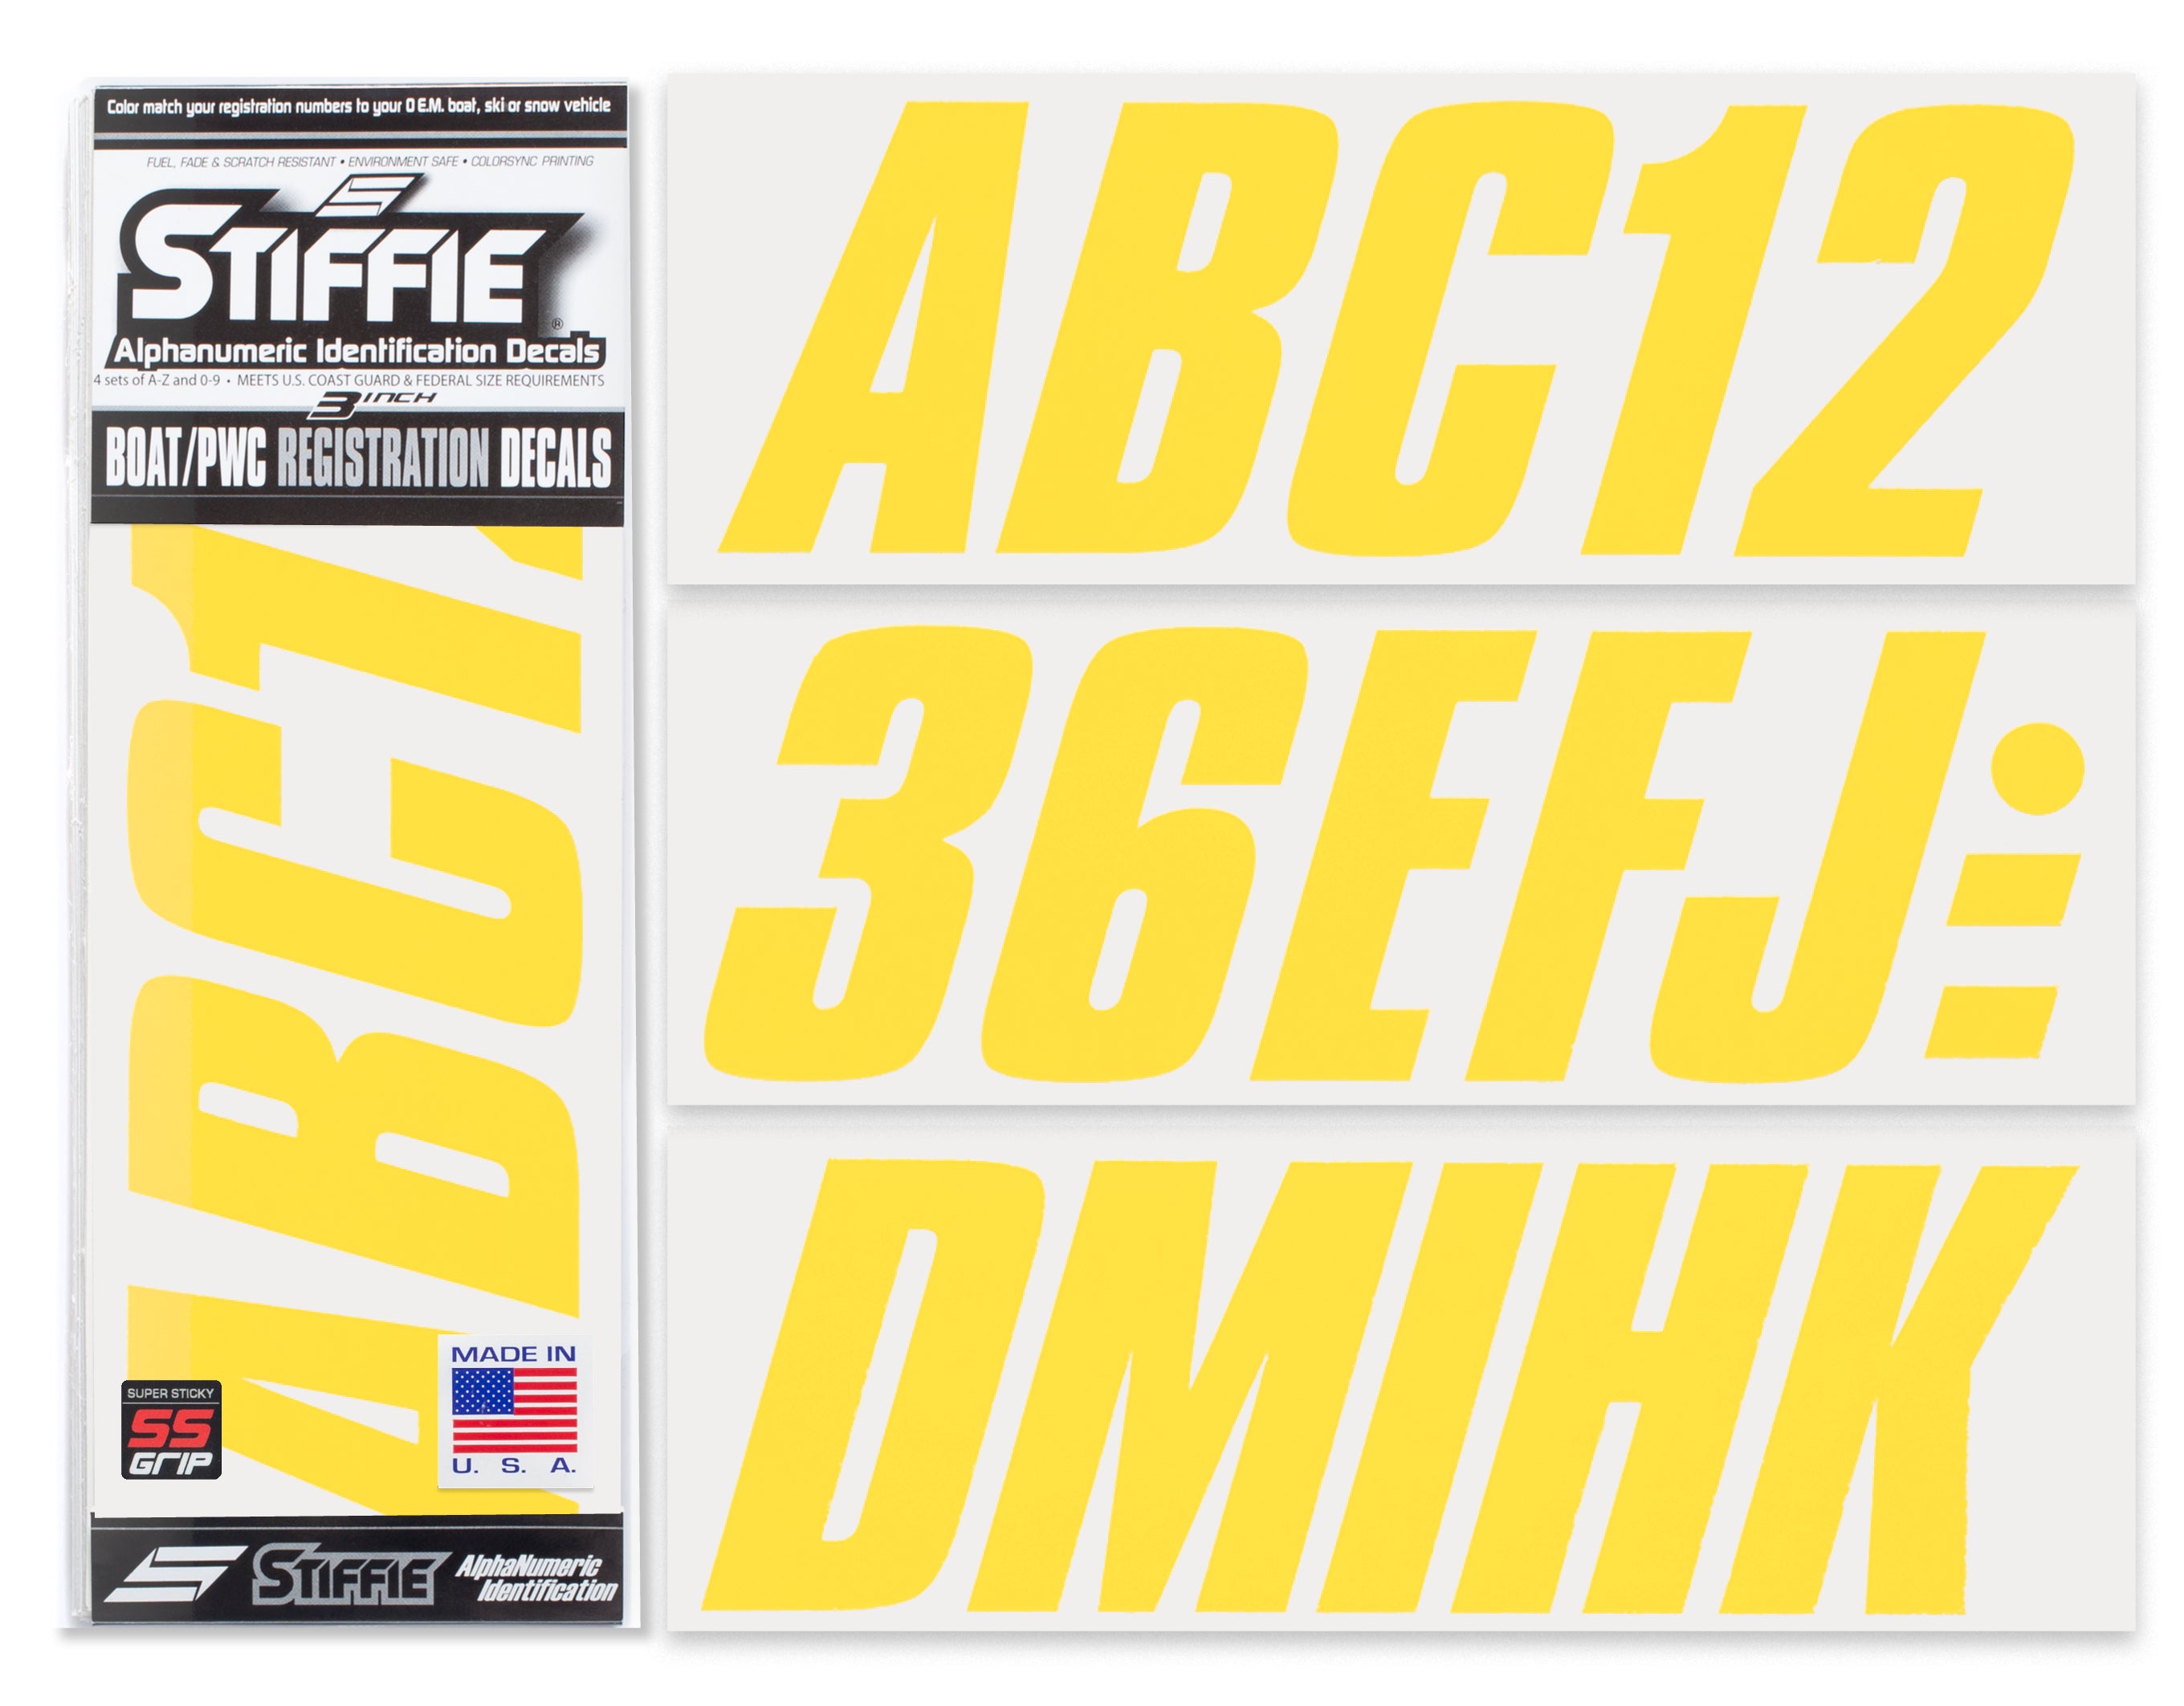 STIFFIE Shift Yellow Crush Super Sticky 3" Alpha Numeric Registration Identification Numbers Stickers Decals for Sea-Doo Spark, Inflatable Boats, Ribs, Hypalon/PVC, PWC and Boats.